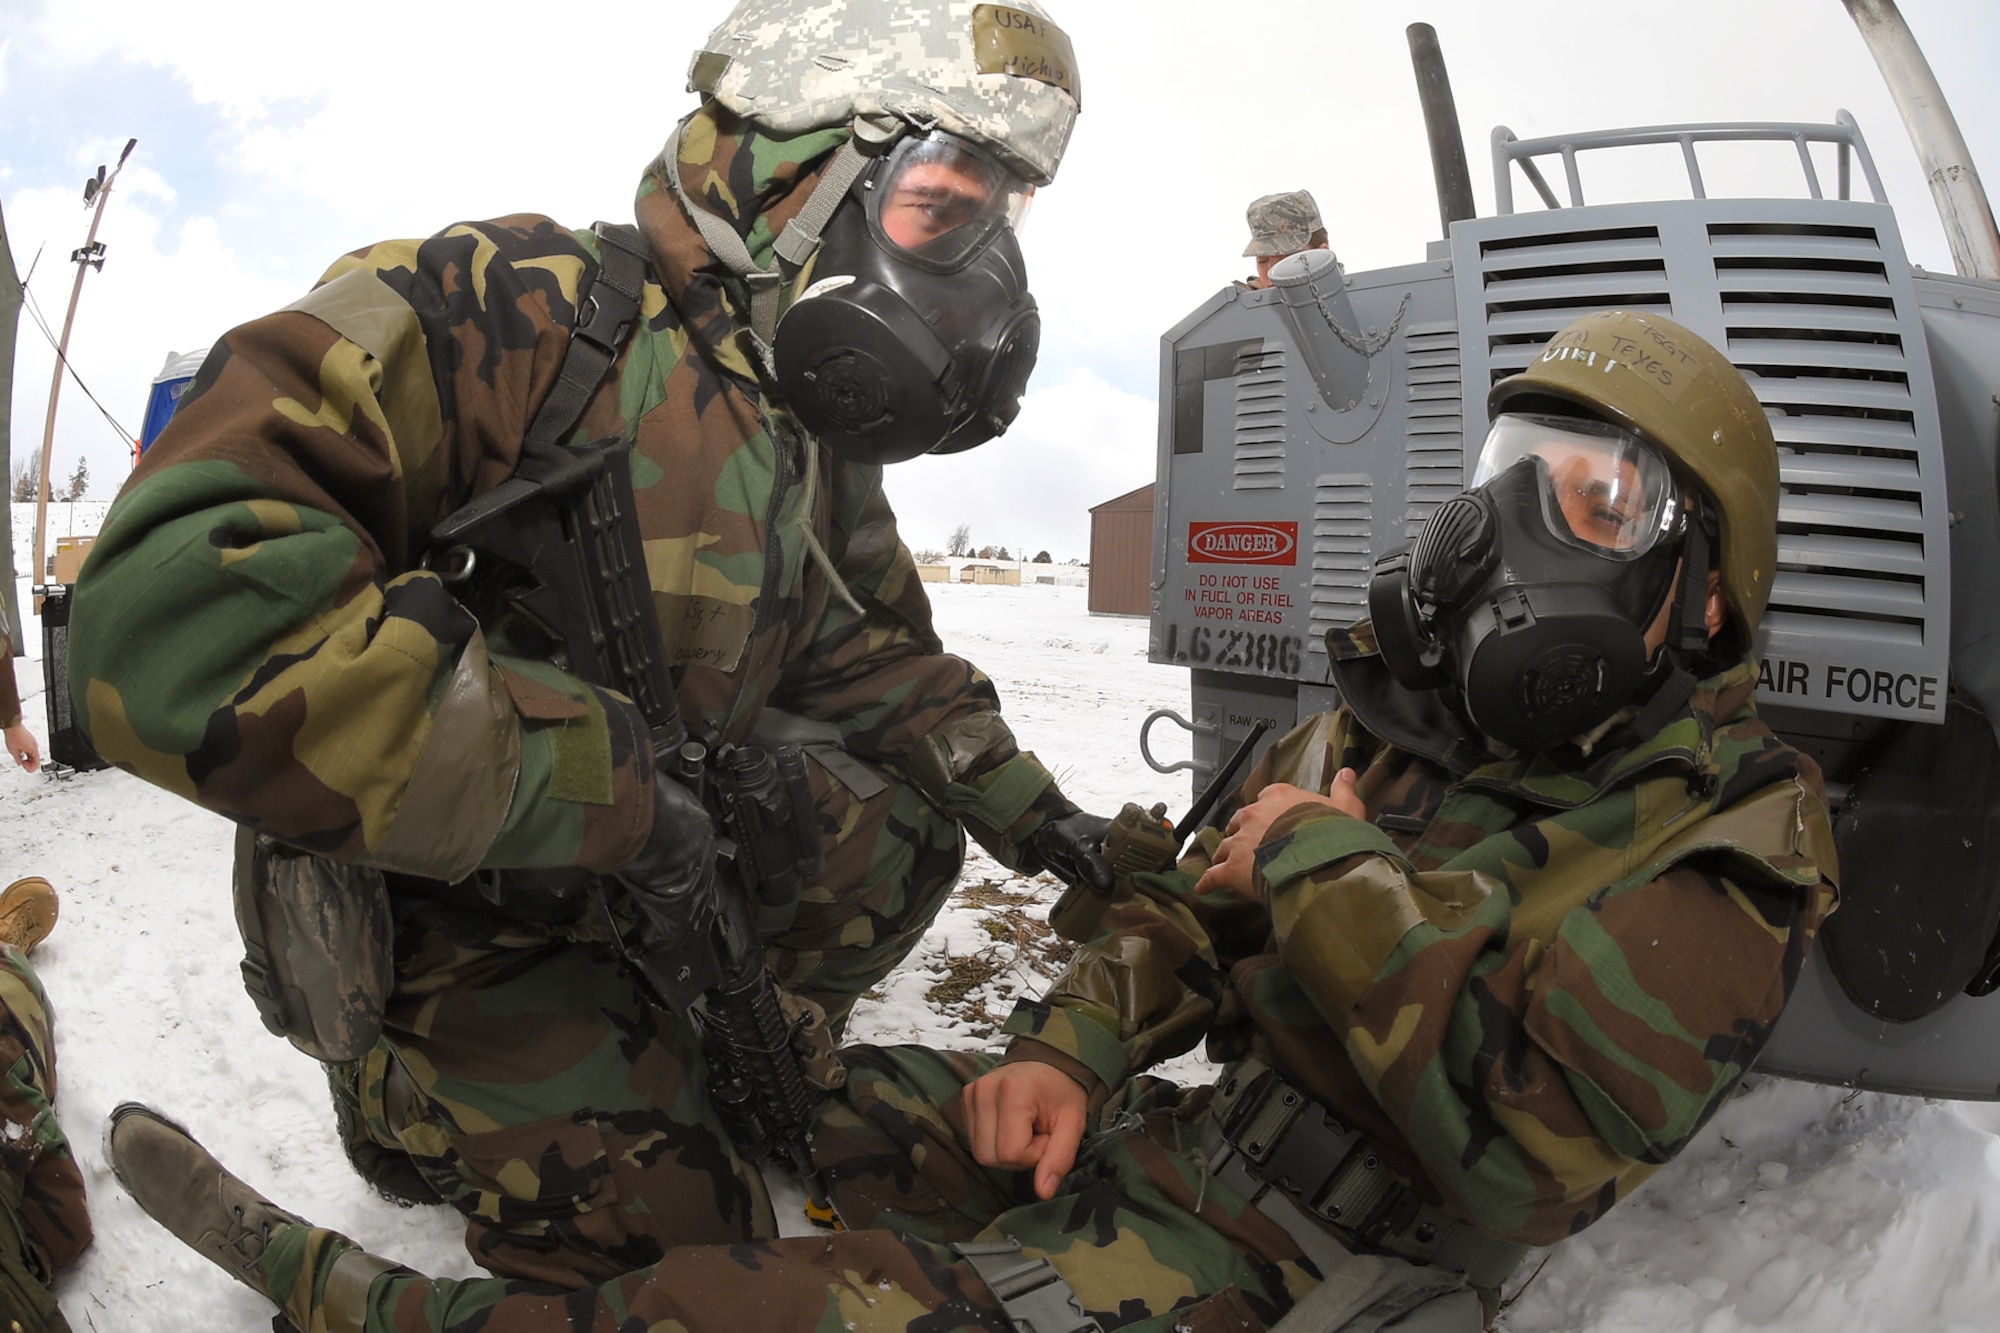 Staff Sgt. Nicholas Lowery, 75th Security Forces Squadron, provides assistance to Tech. Sgt. Marvin Teyes, 75th Air Base Wing, during a readiness exercise, Feb. 7, 2019, at Hill Air Force Base, Utah. During the exercise, Airmen donned mission-oriented projective posture, or MOPP, gear and were assessed on performing different tasks in a simulated toxic environment to improve their operational readiness. (U.S. Air Force photo by Todd Cromar)